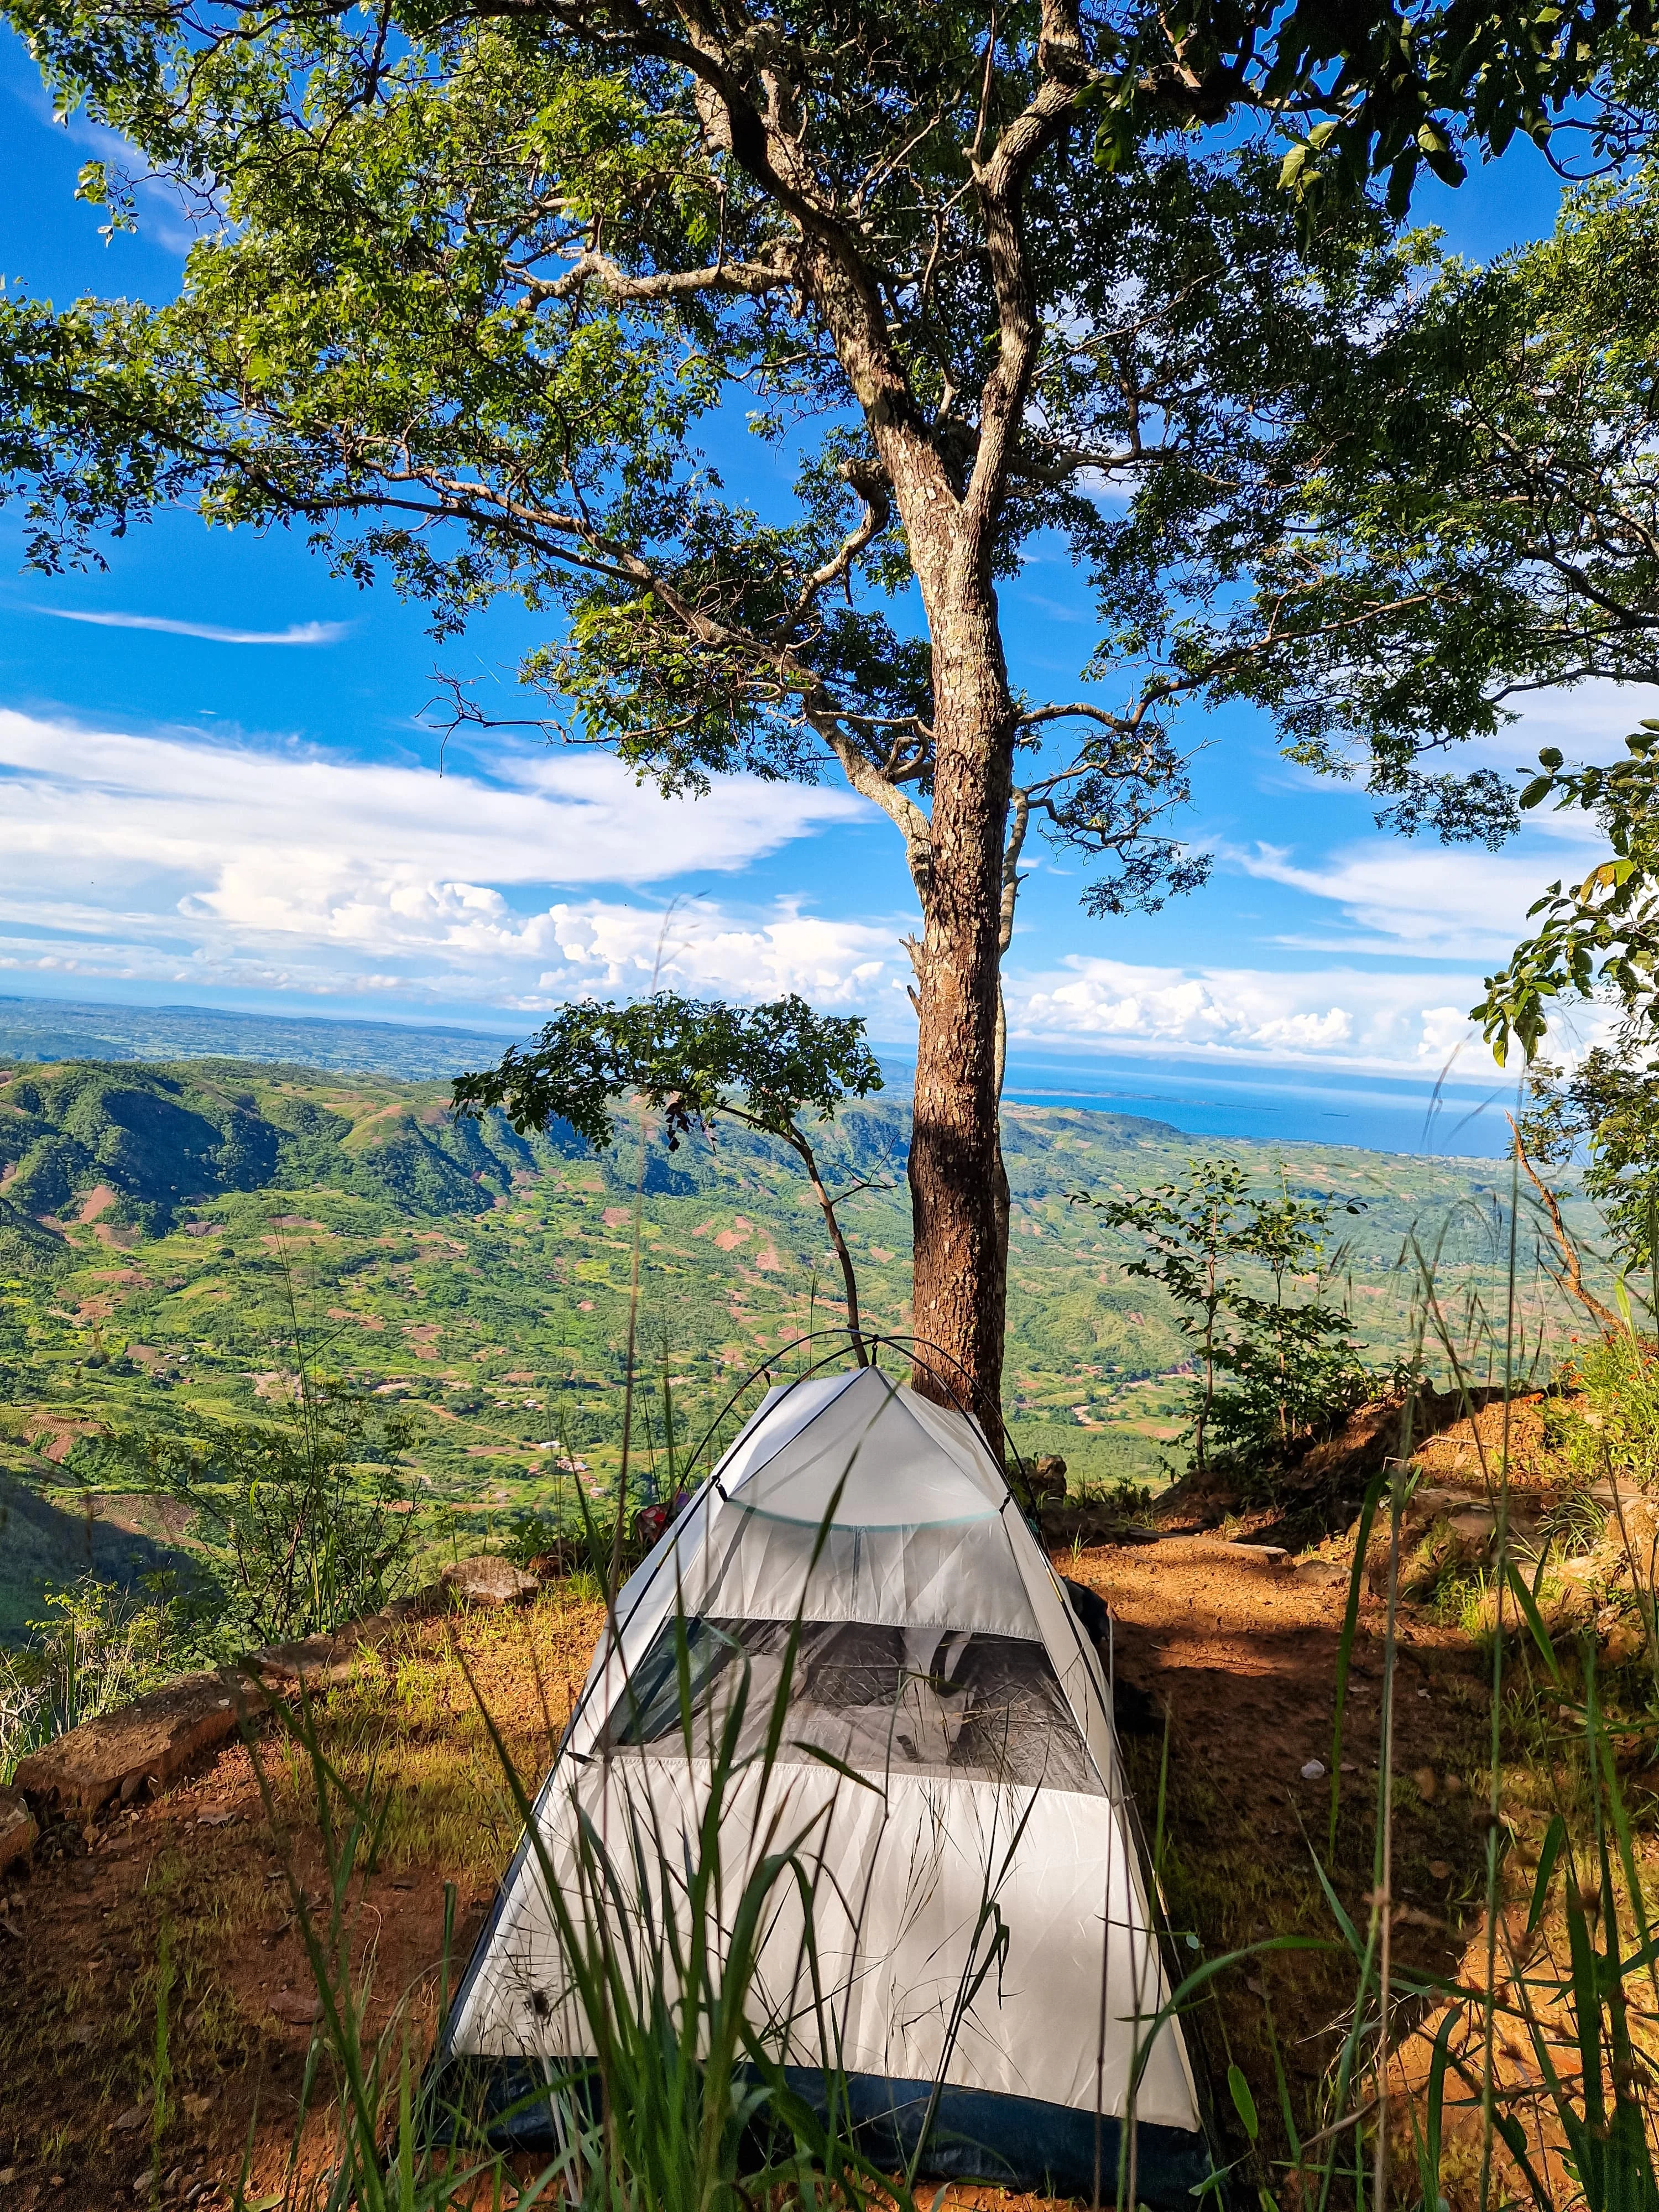 Our camping spot at the Mushroom Farm in Malawi